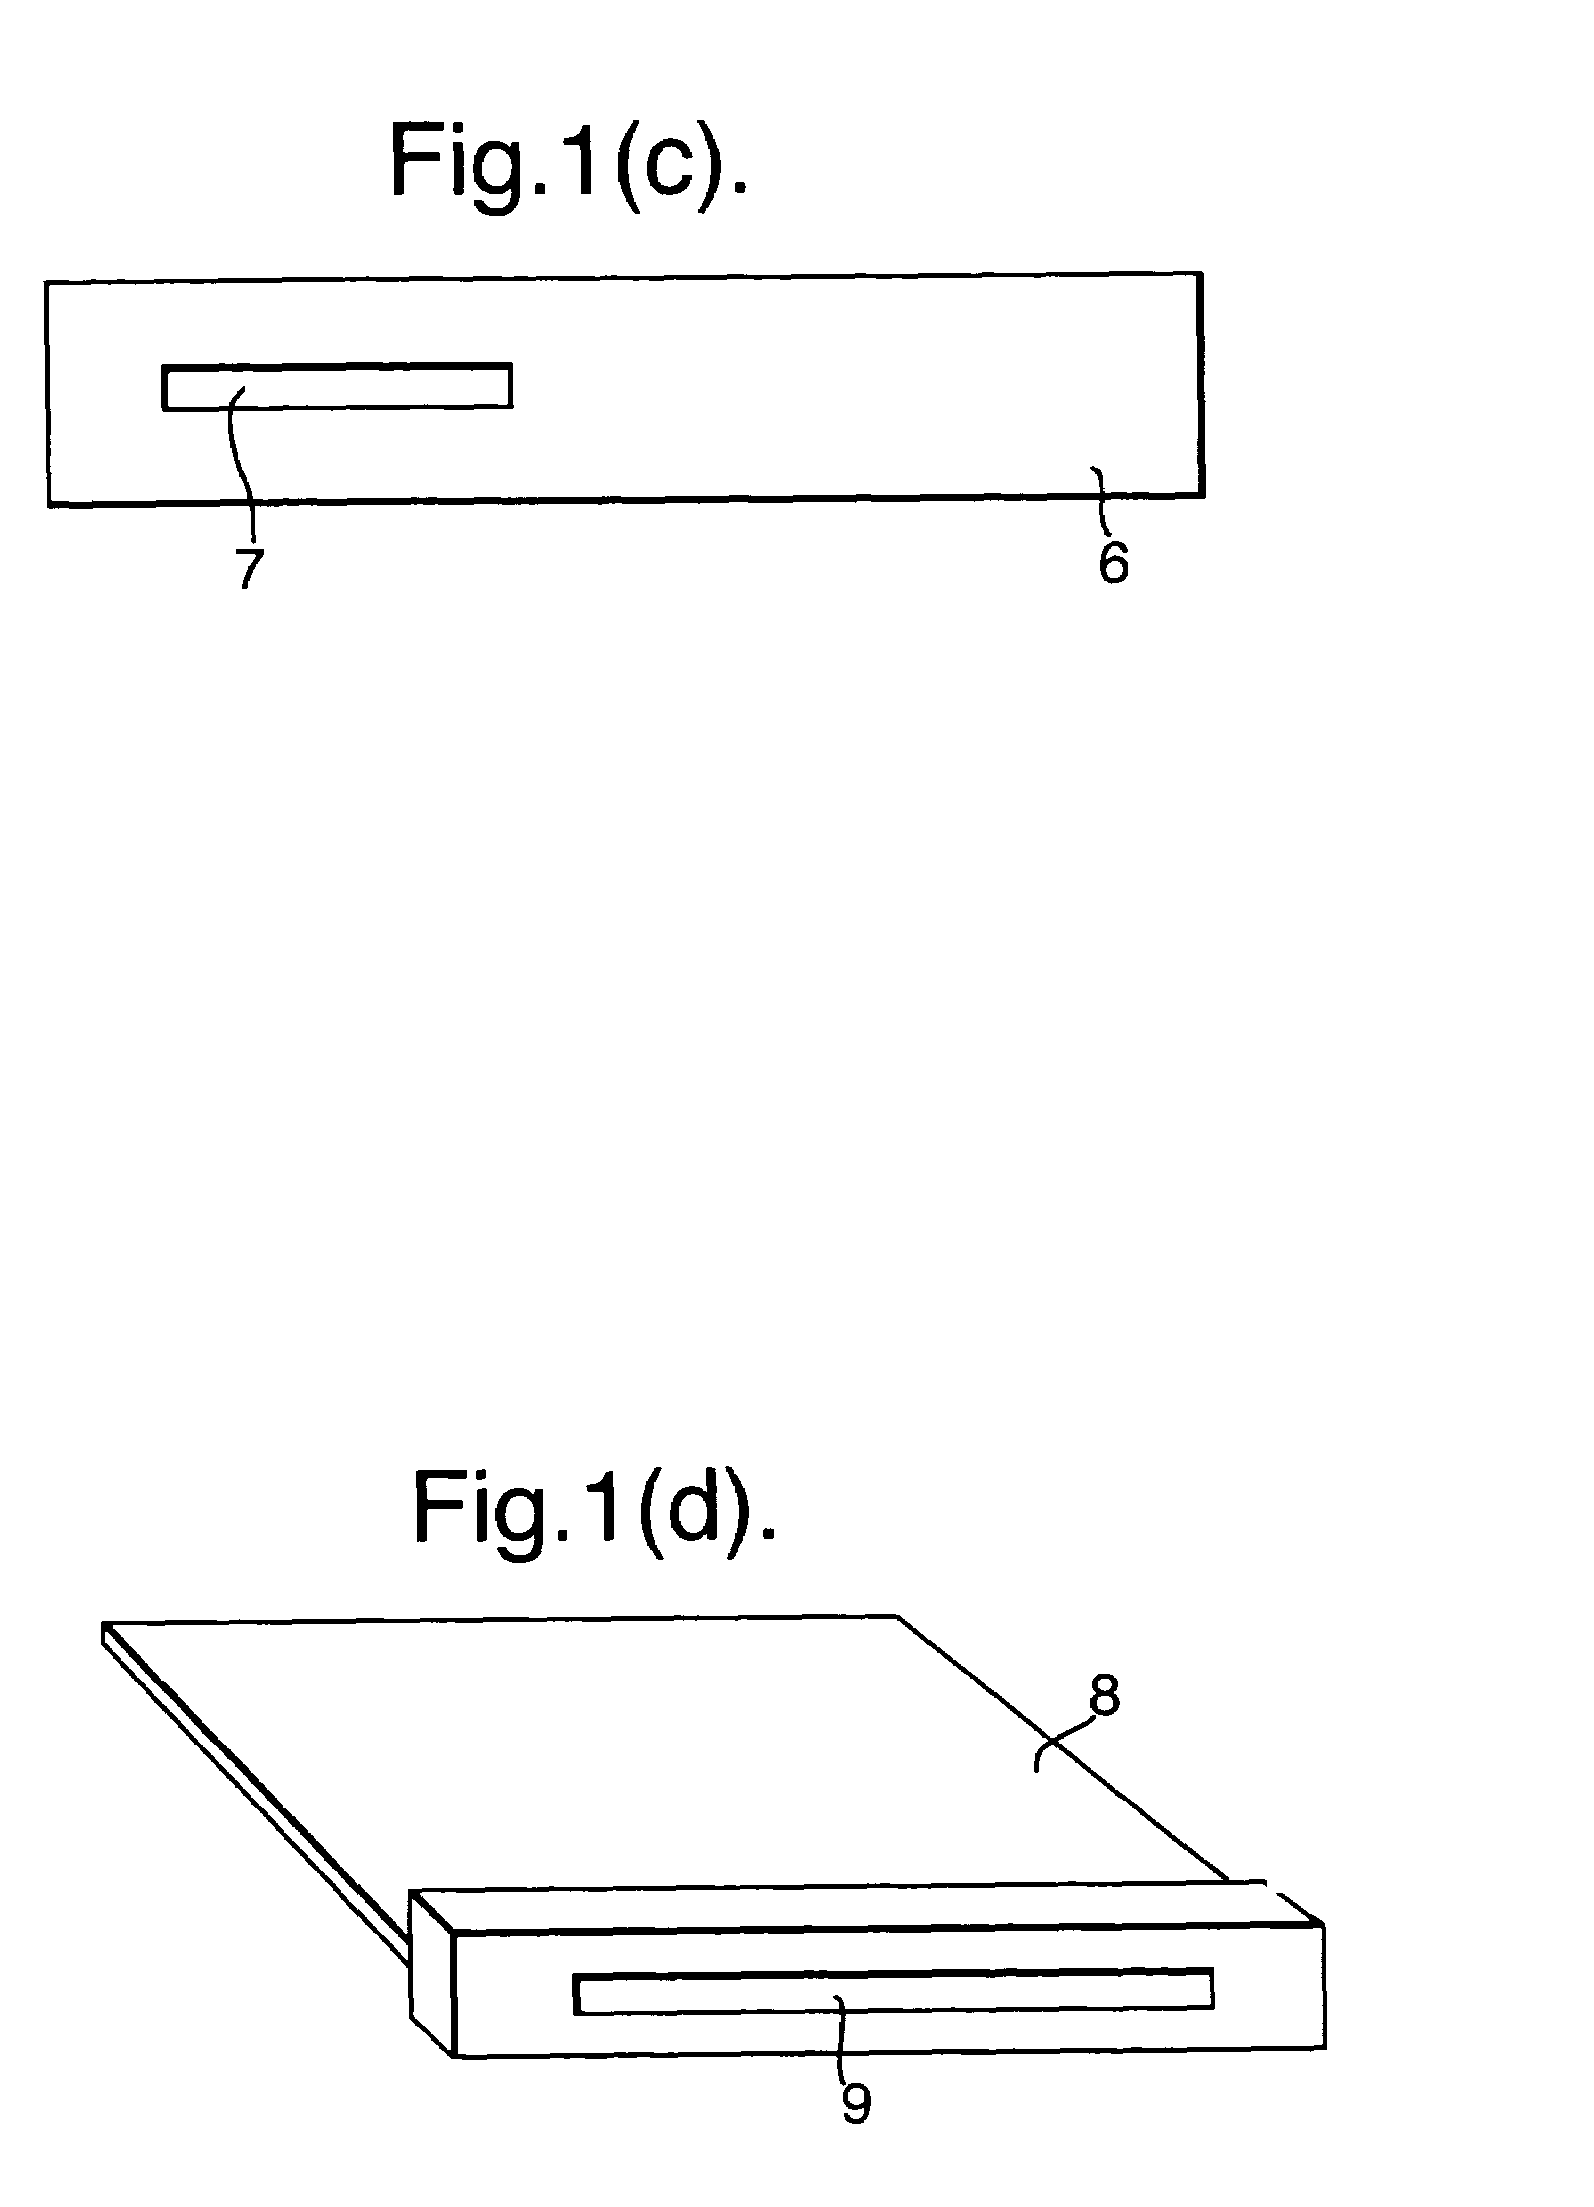 Common interface controller and method of descrambling transport stream channels